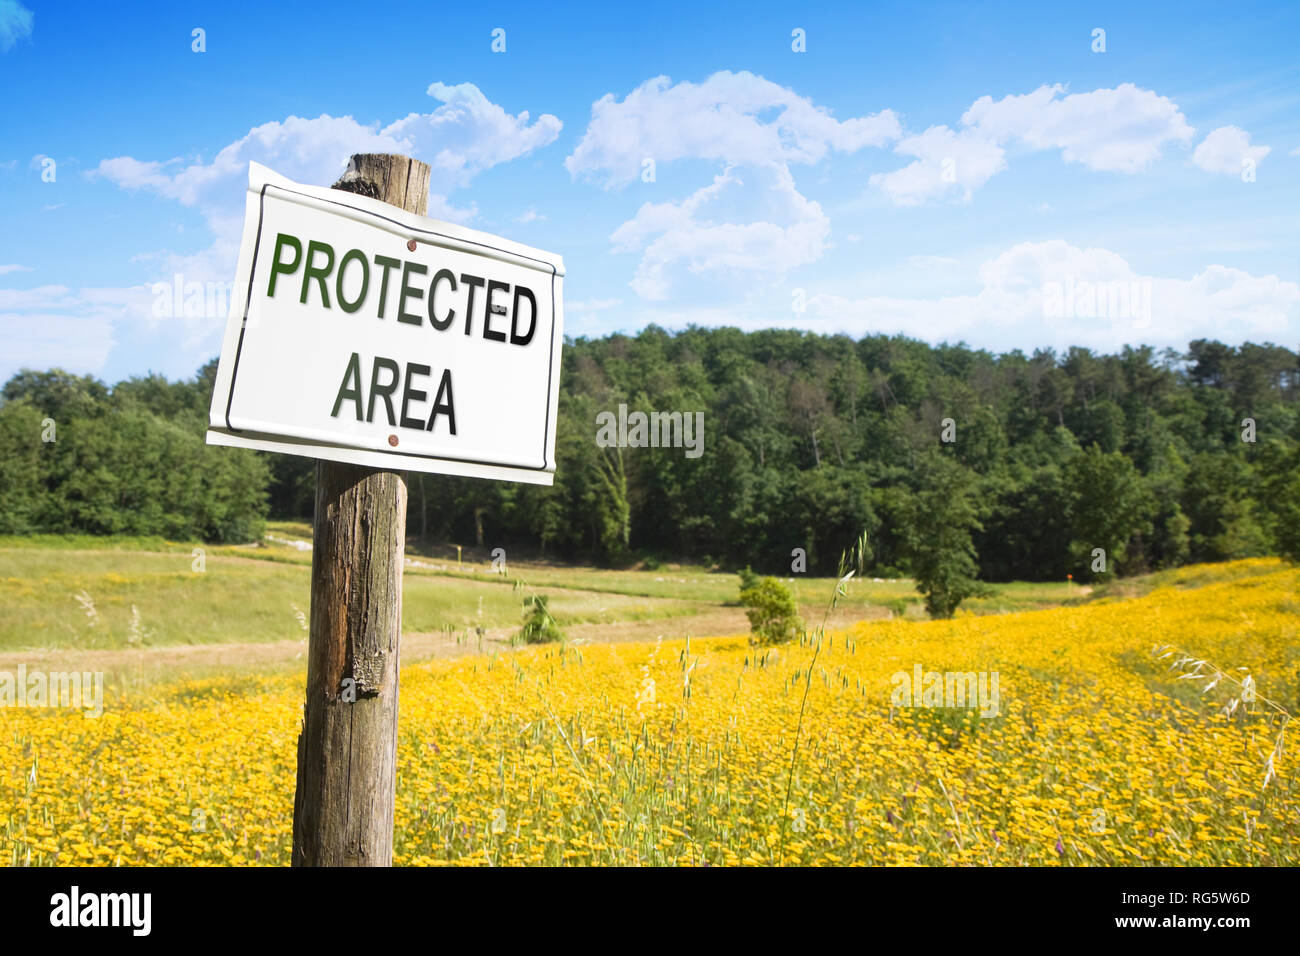 'Protected area' written on a field sign - Sign indicating in the countryside - image with copy space Stock Photo